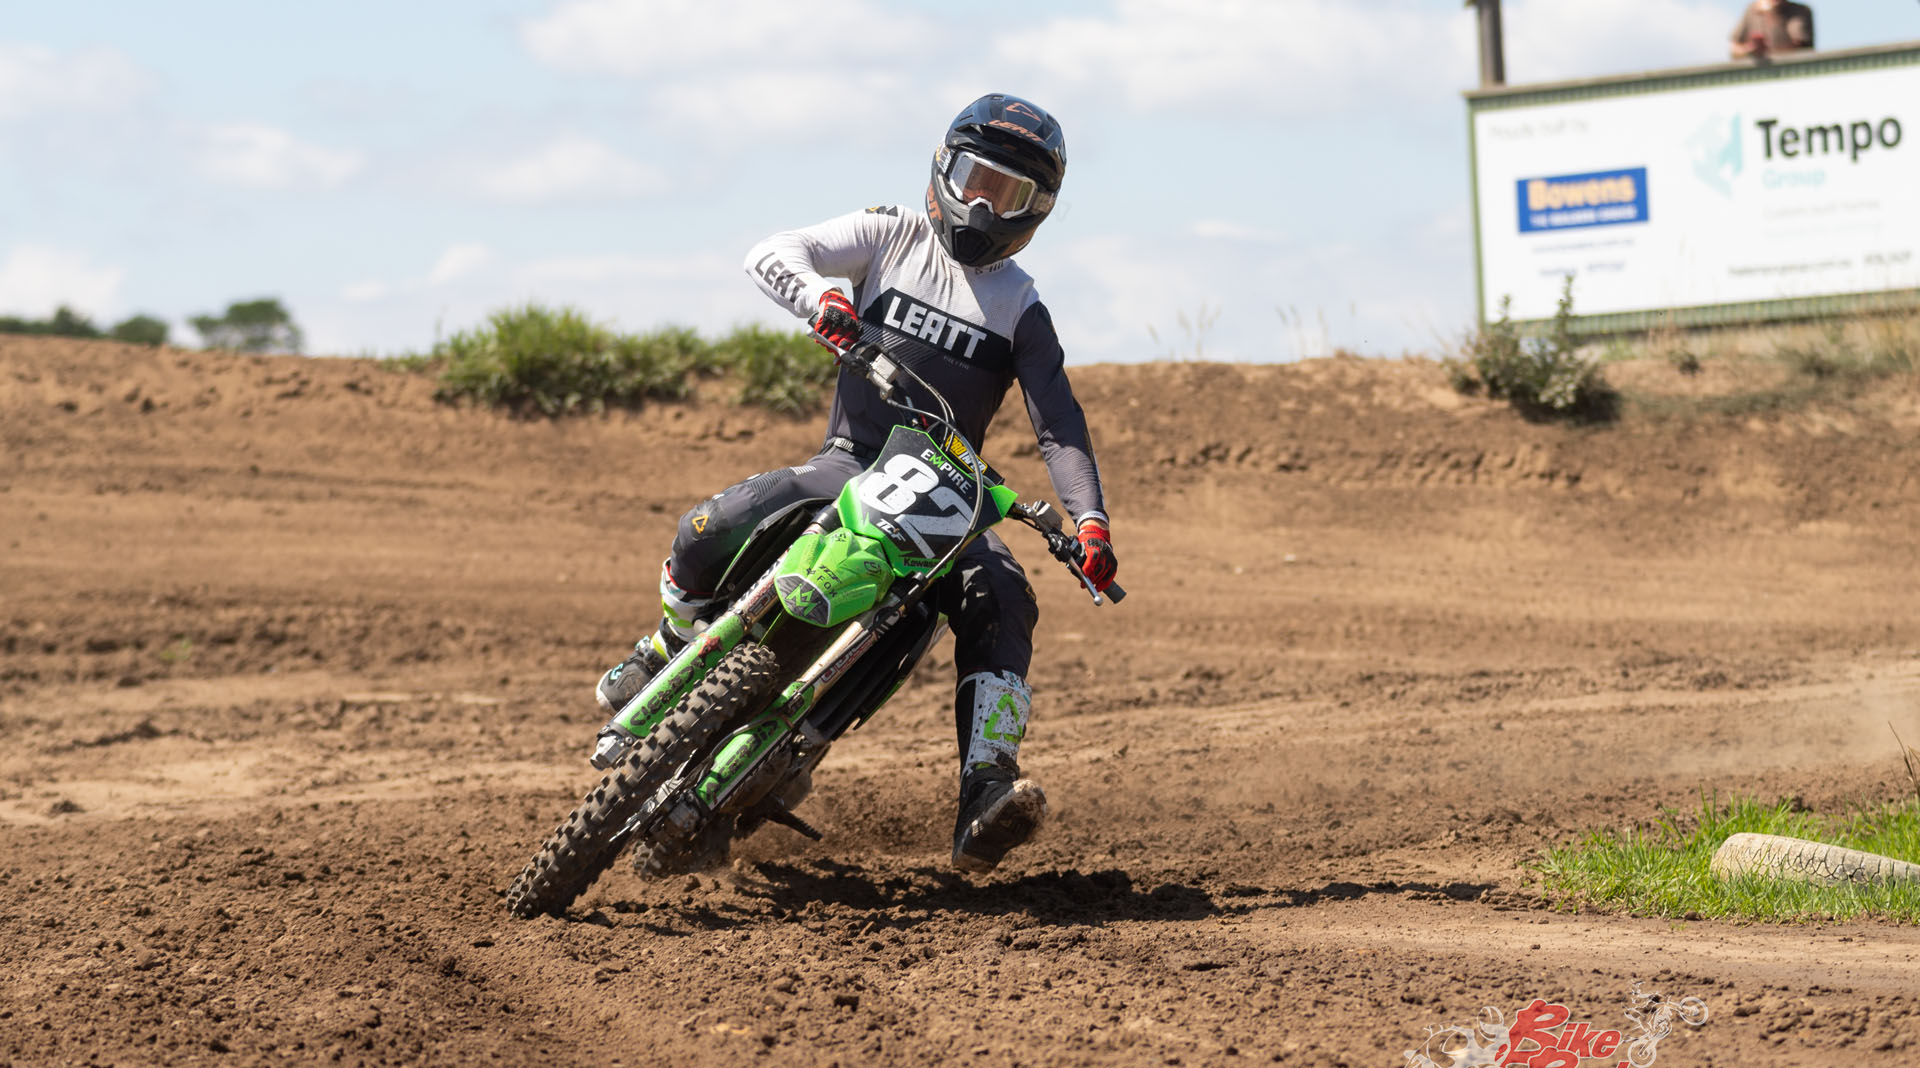 The MX3 rider Campbell Williams is also another new face to the team. He is enjoying his first time on a Kawasaki and having such a good team helping piece everything together ready for the year.